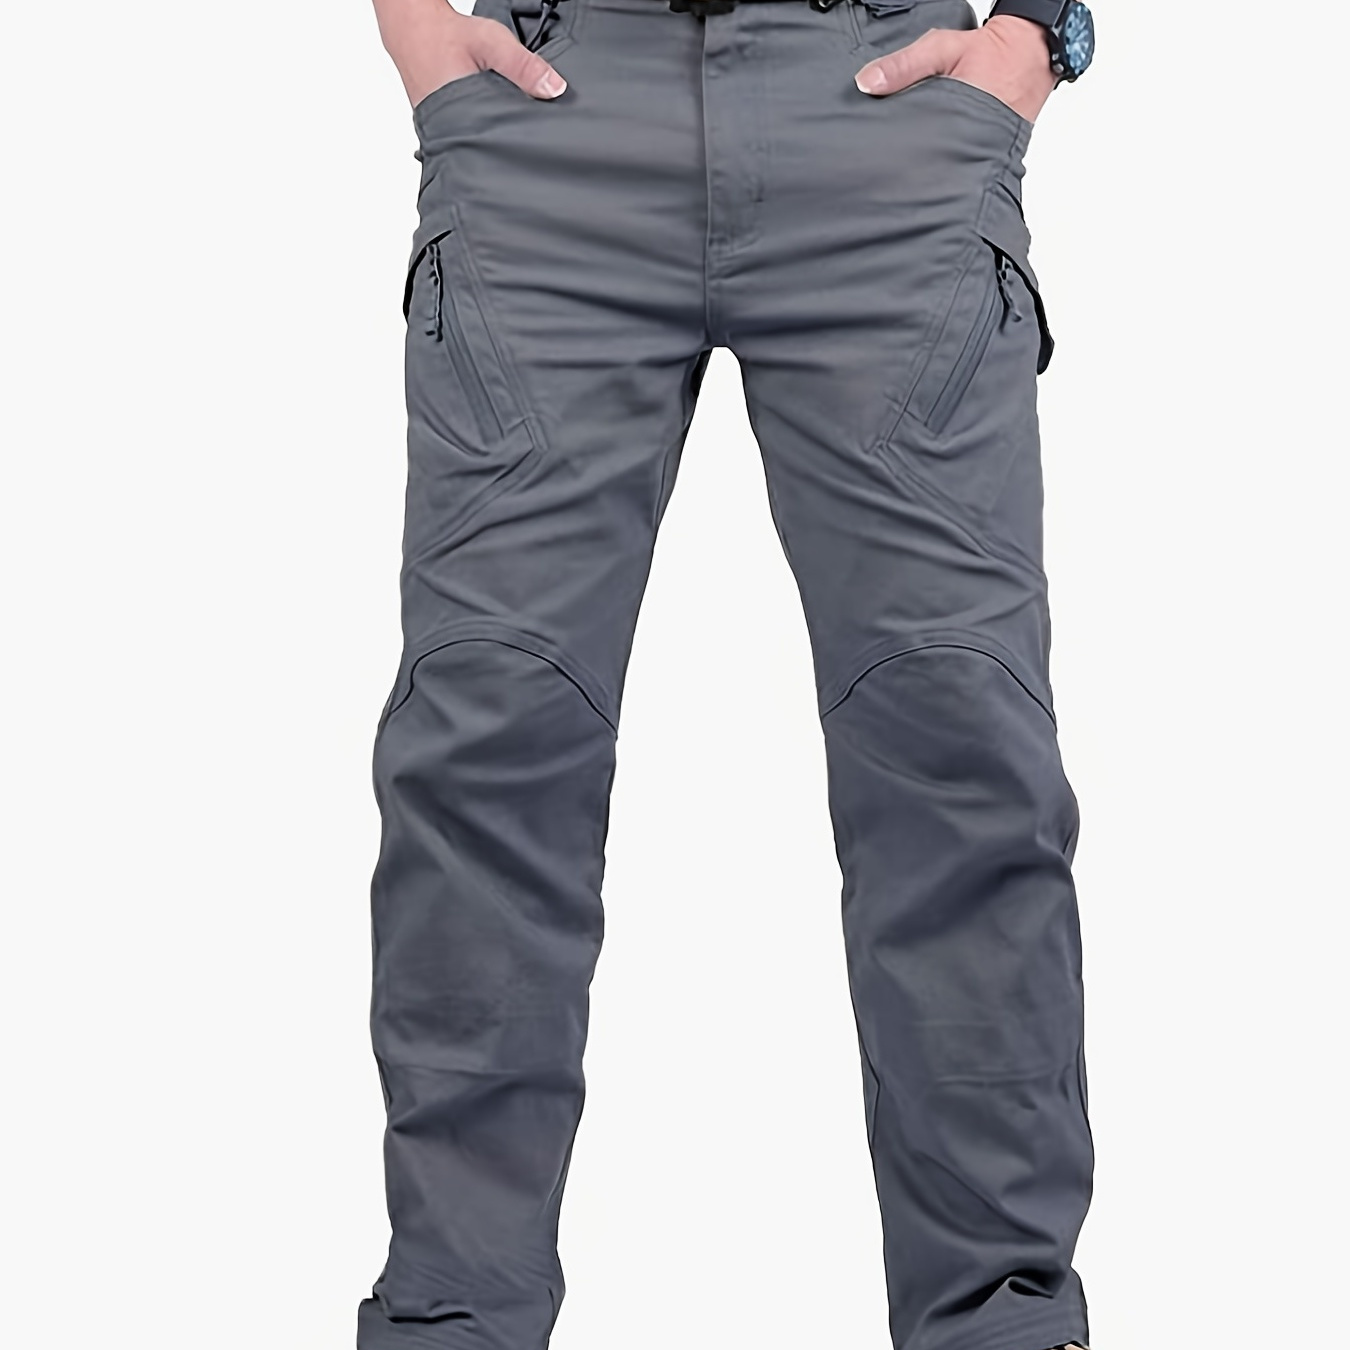 

Men's Casual Cargo Pants With Zipper Pockets, Male Joggers For Spring And Fall Outdoor